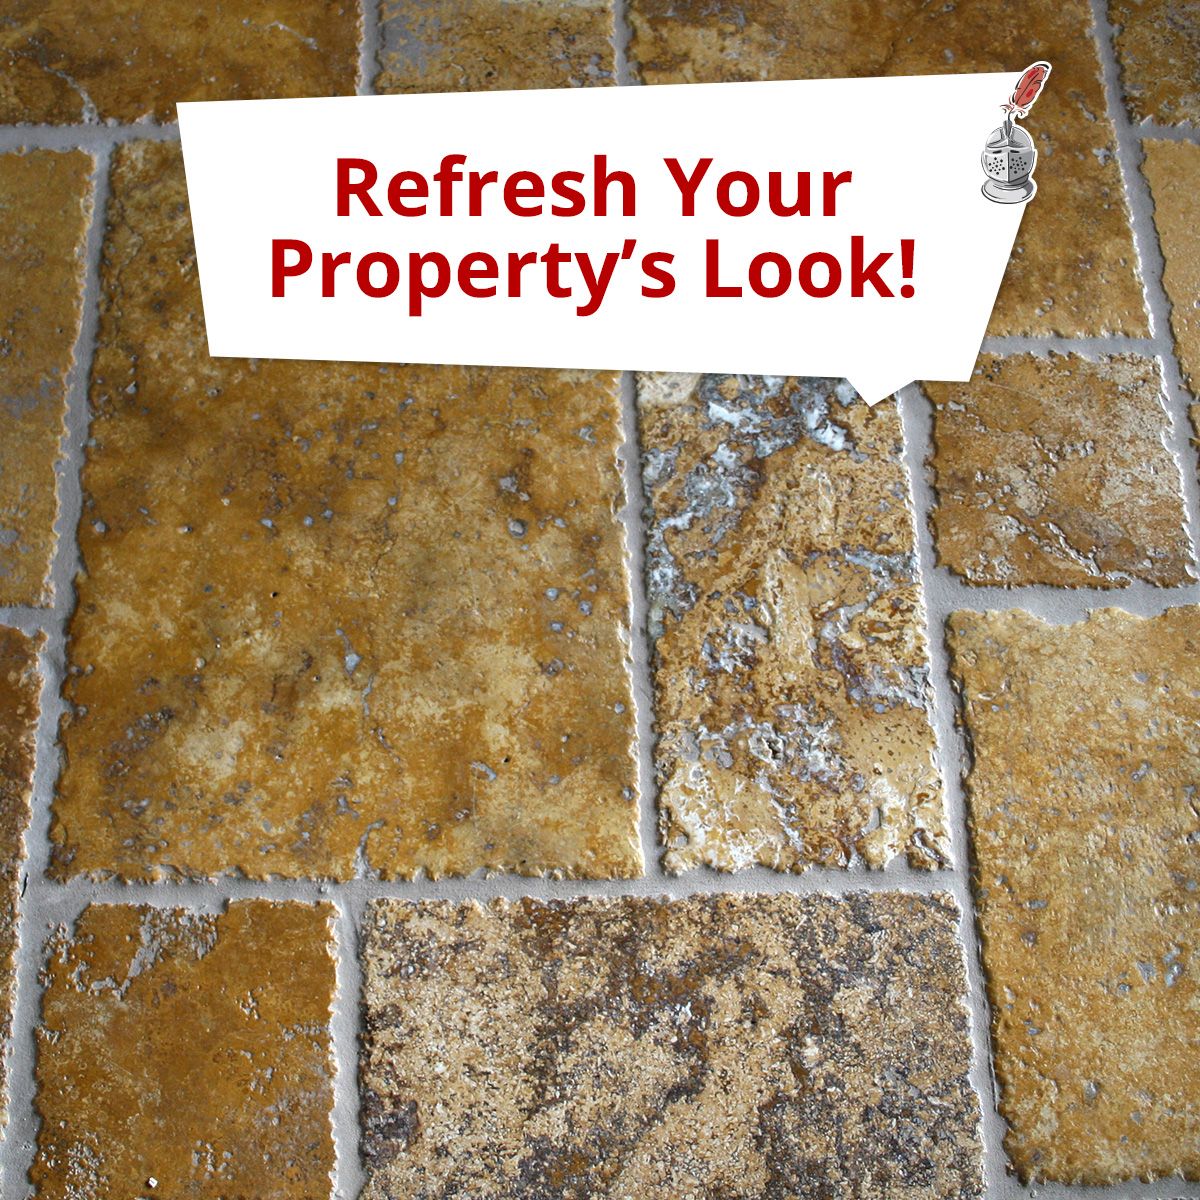 Refresh Your Property's Look!